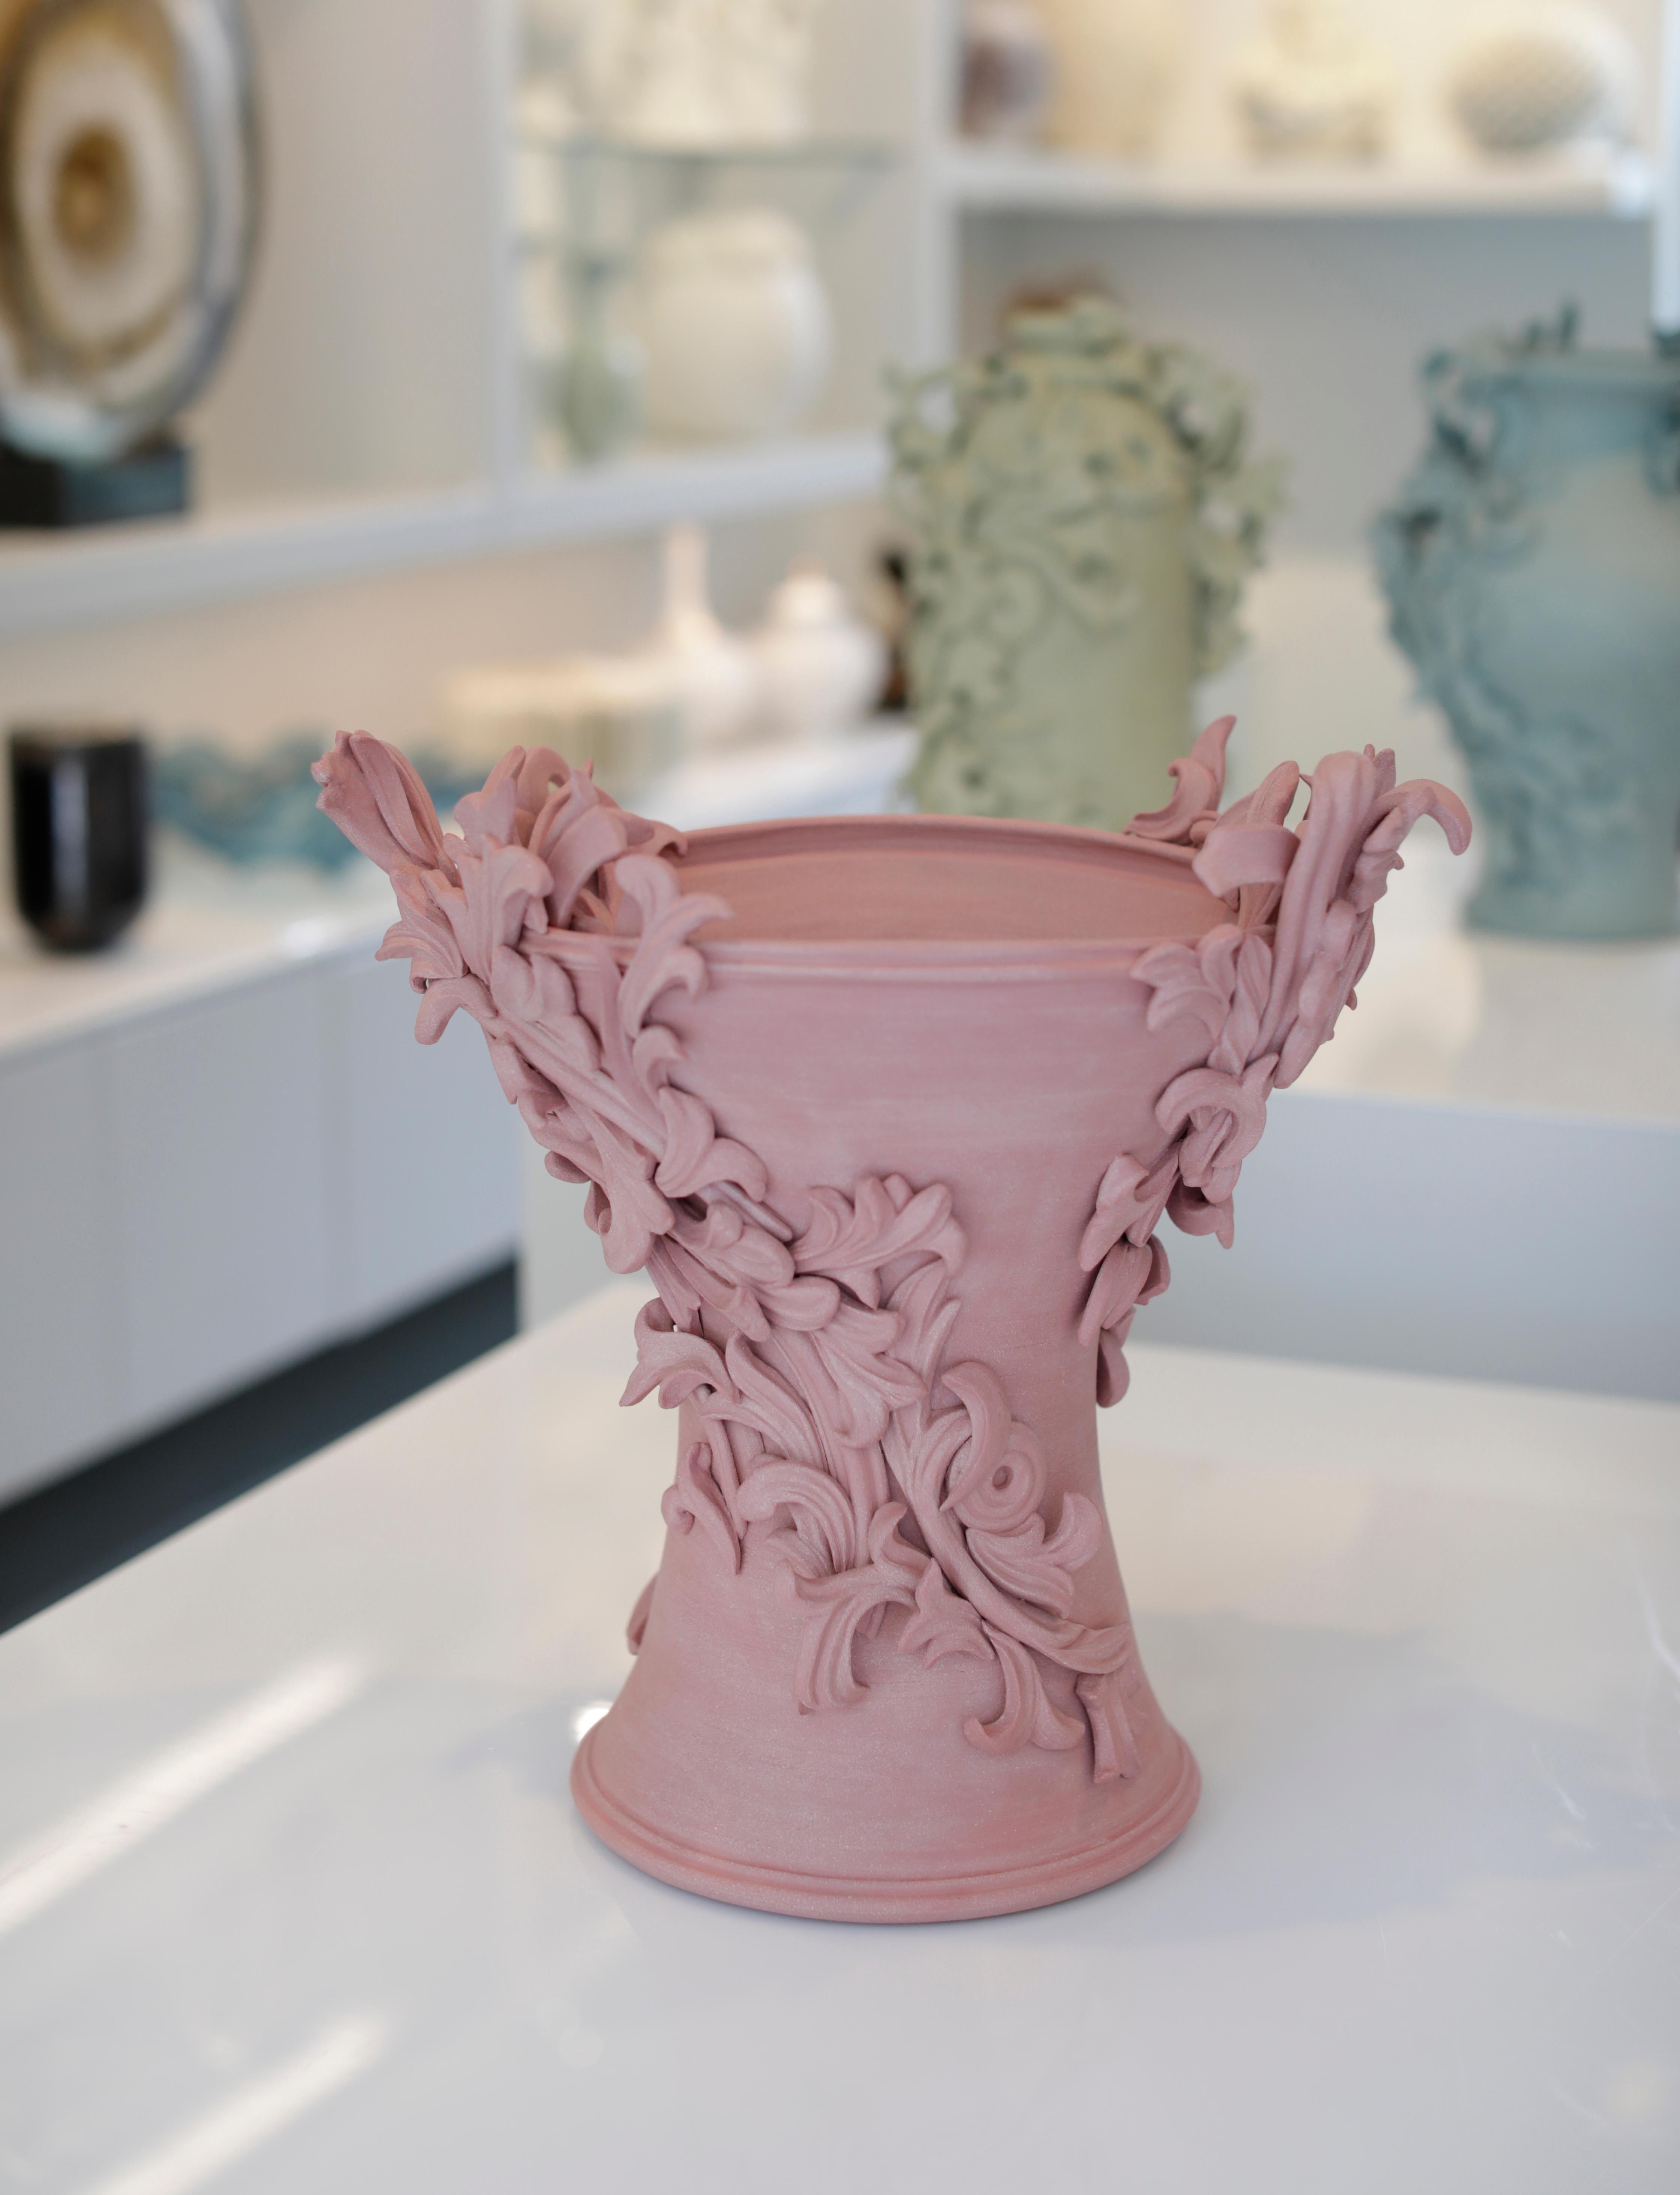 Hand-Crafted Vari Capitelli V, a Unique Ceramic Vase in Vibrant Salmon Pink by Jo Taylor